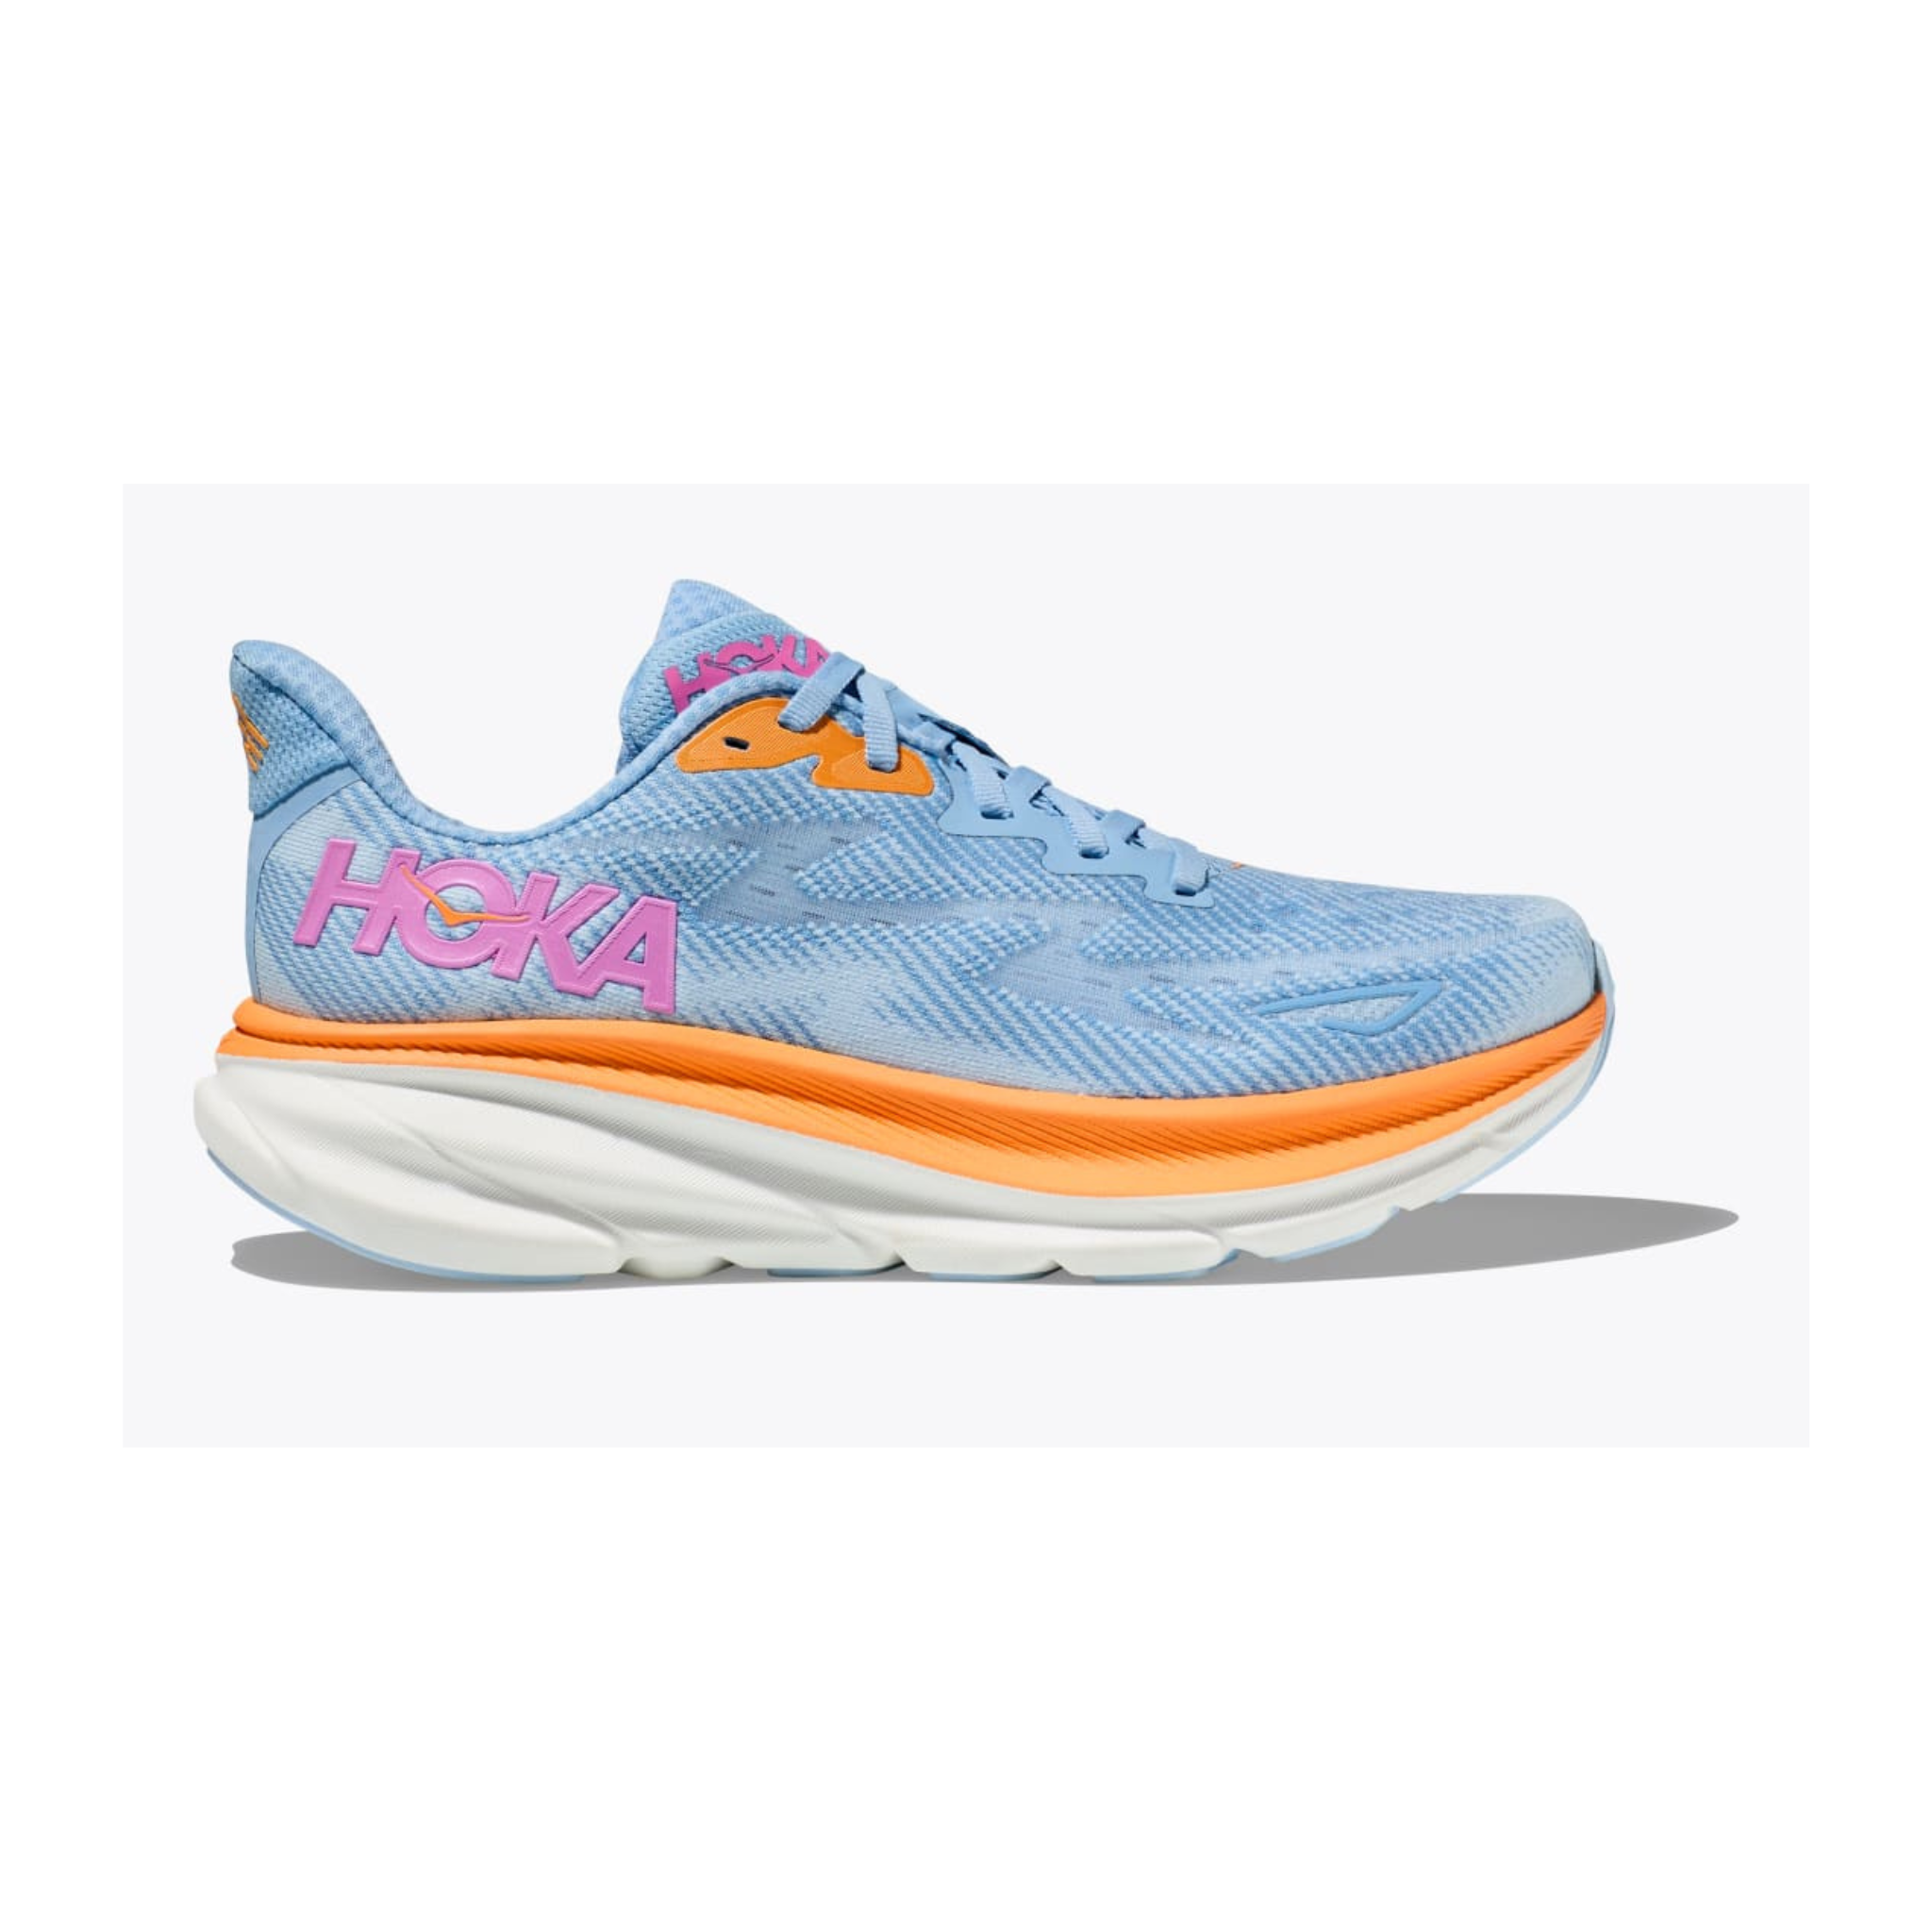 HOKA WOMEN'S CLIFTON 9 - WIDE D - ABIW AIRY BLUE/ICE WATER 5.0